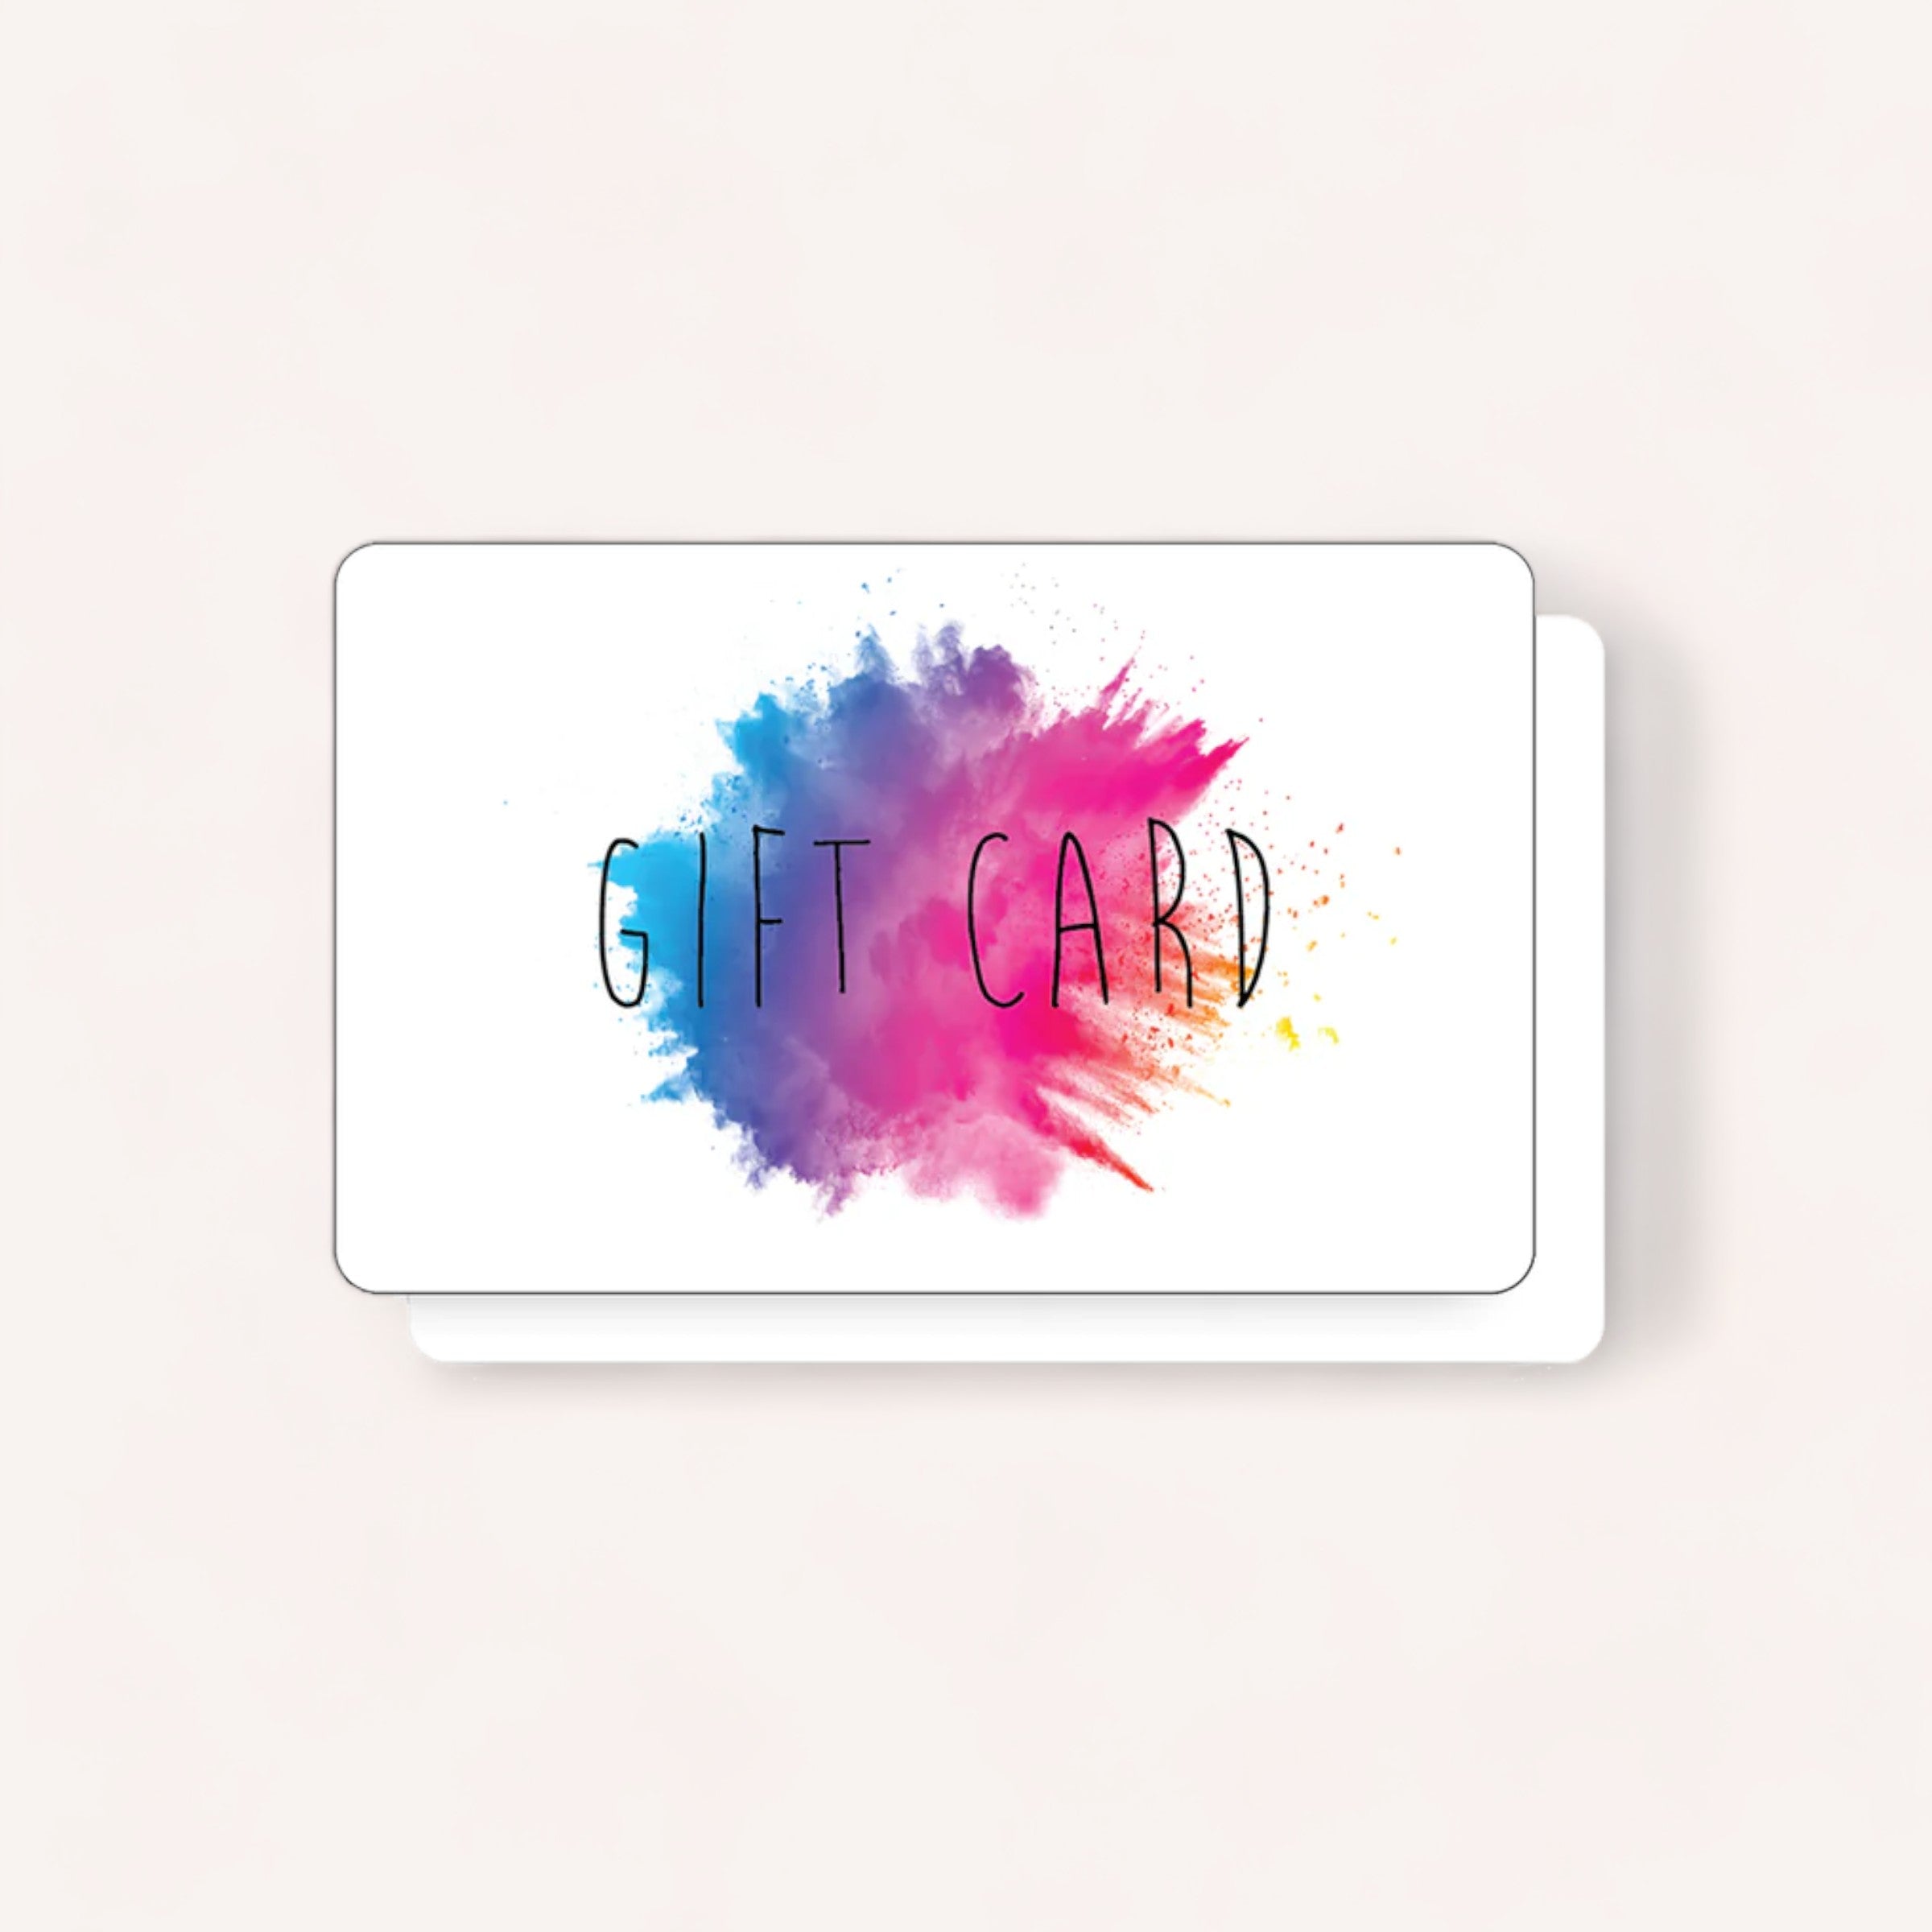 A digital gift card image with a vibrant, multicolored watercolor splash background displaying the words "gift cards" in bold, centered text on a light background from giftbox co.